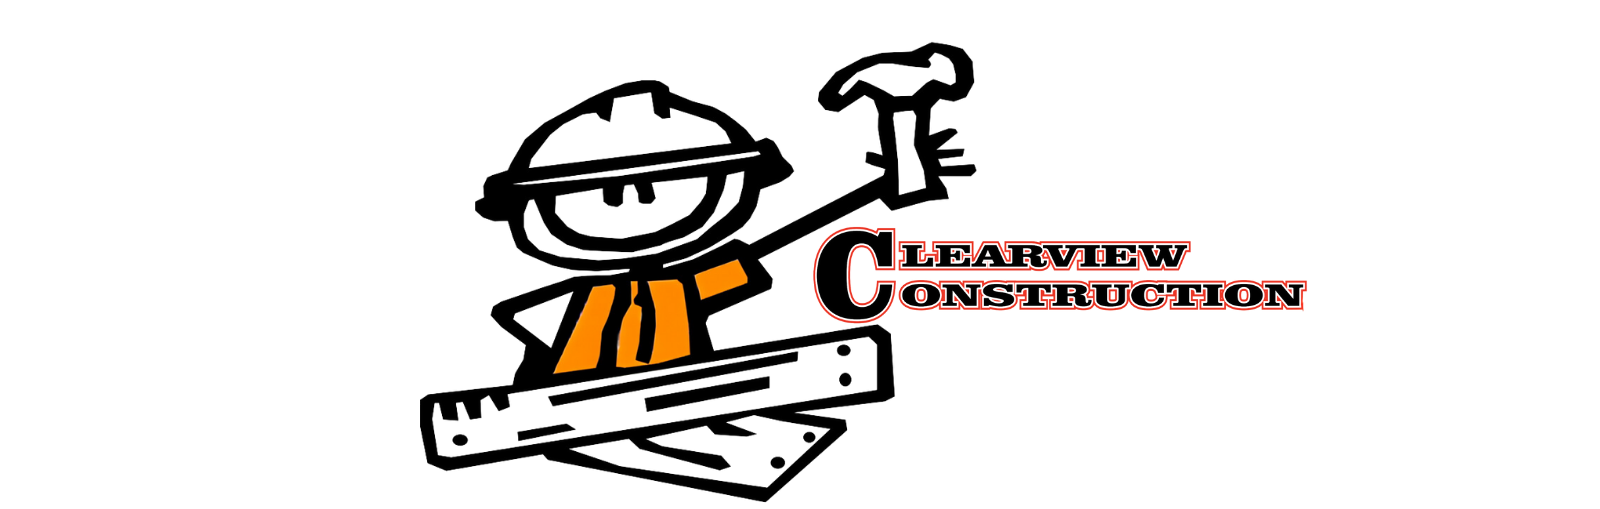 Clearview Logo icon and text